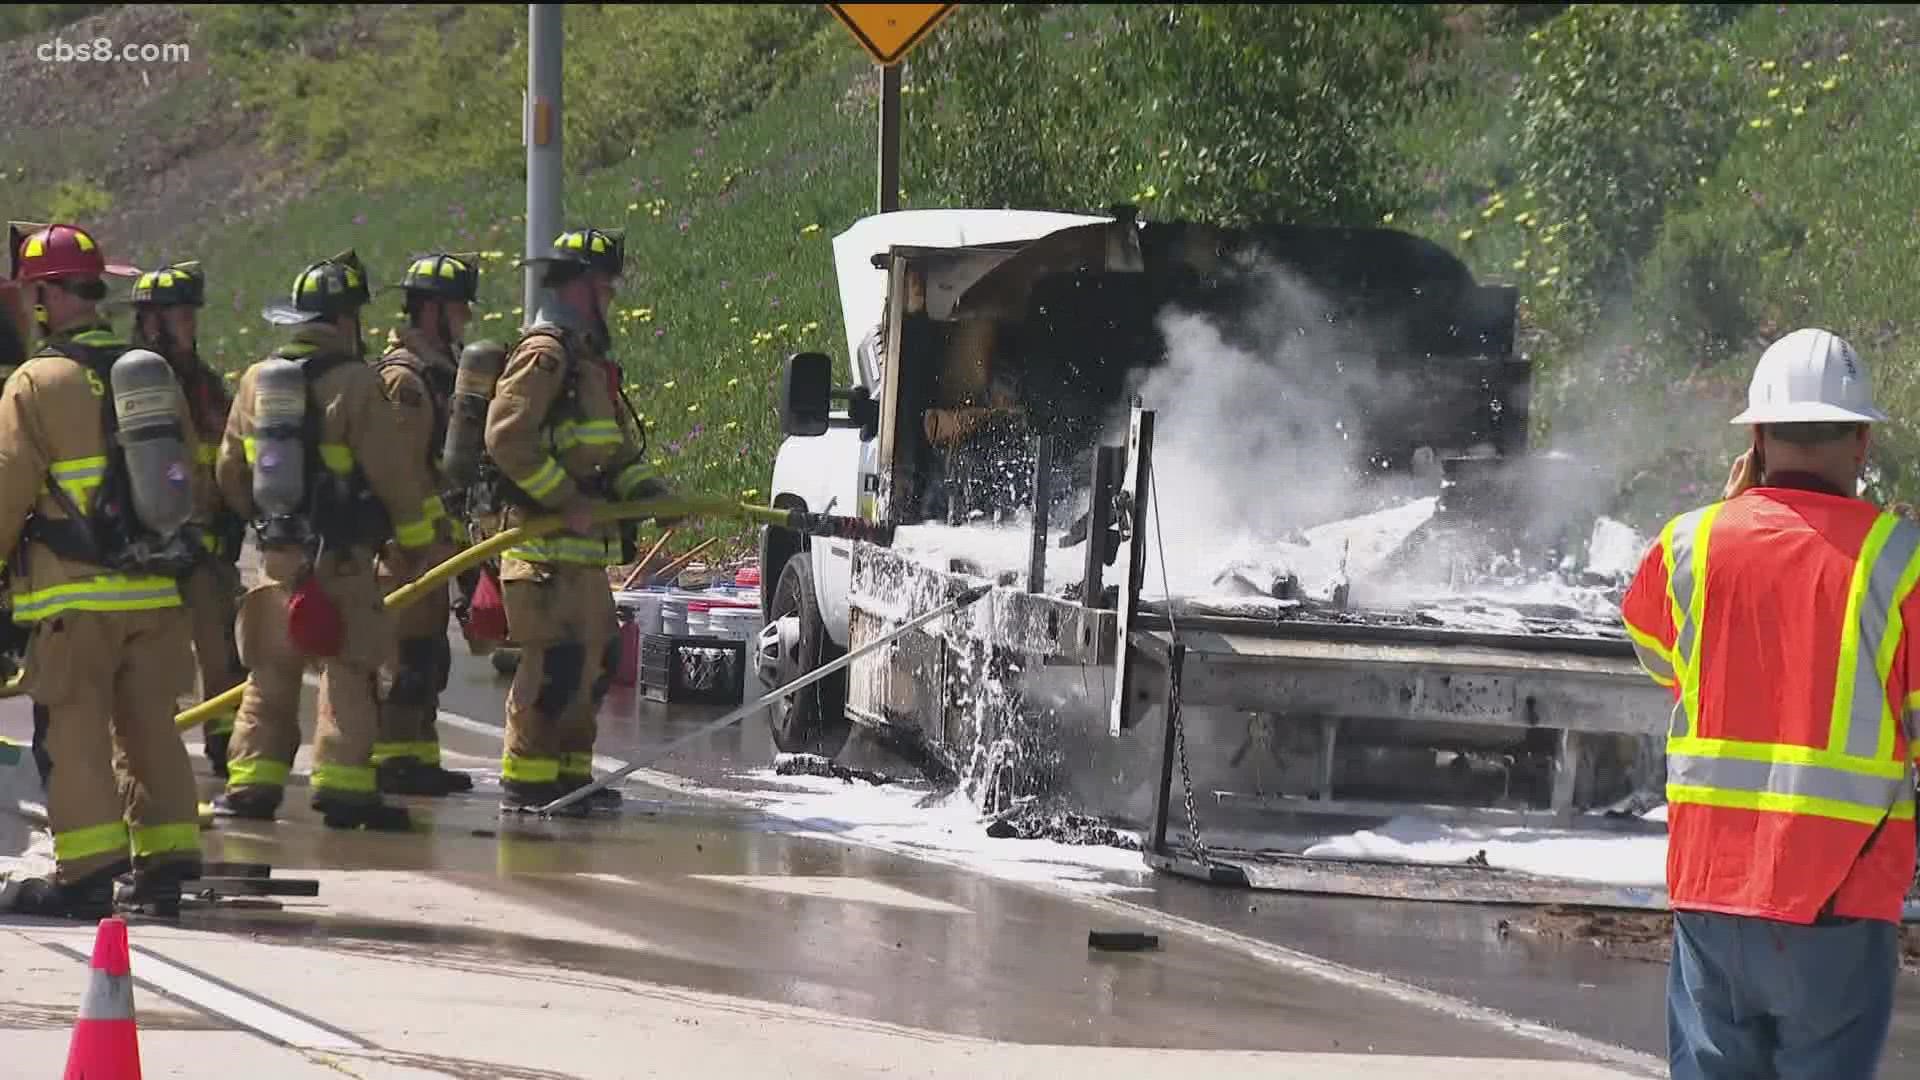 Hazmat was on the scene Tuesday afternoon cleaning up after a box truck fire on southbound I-805 near SR-163.